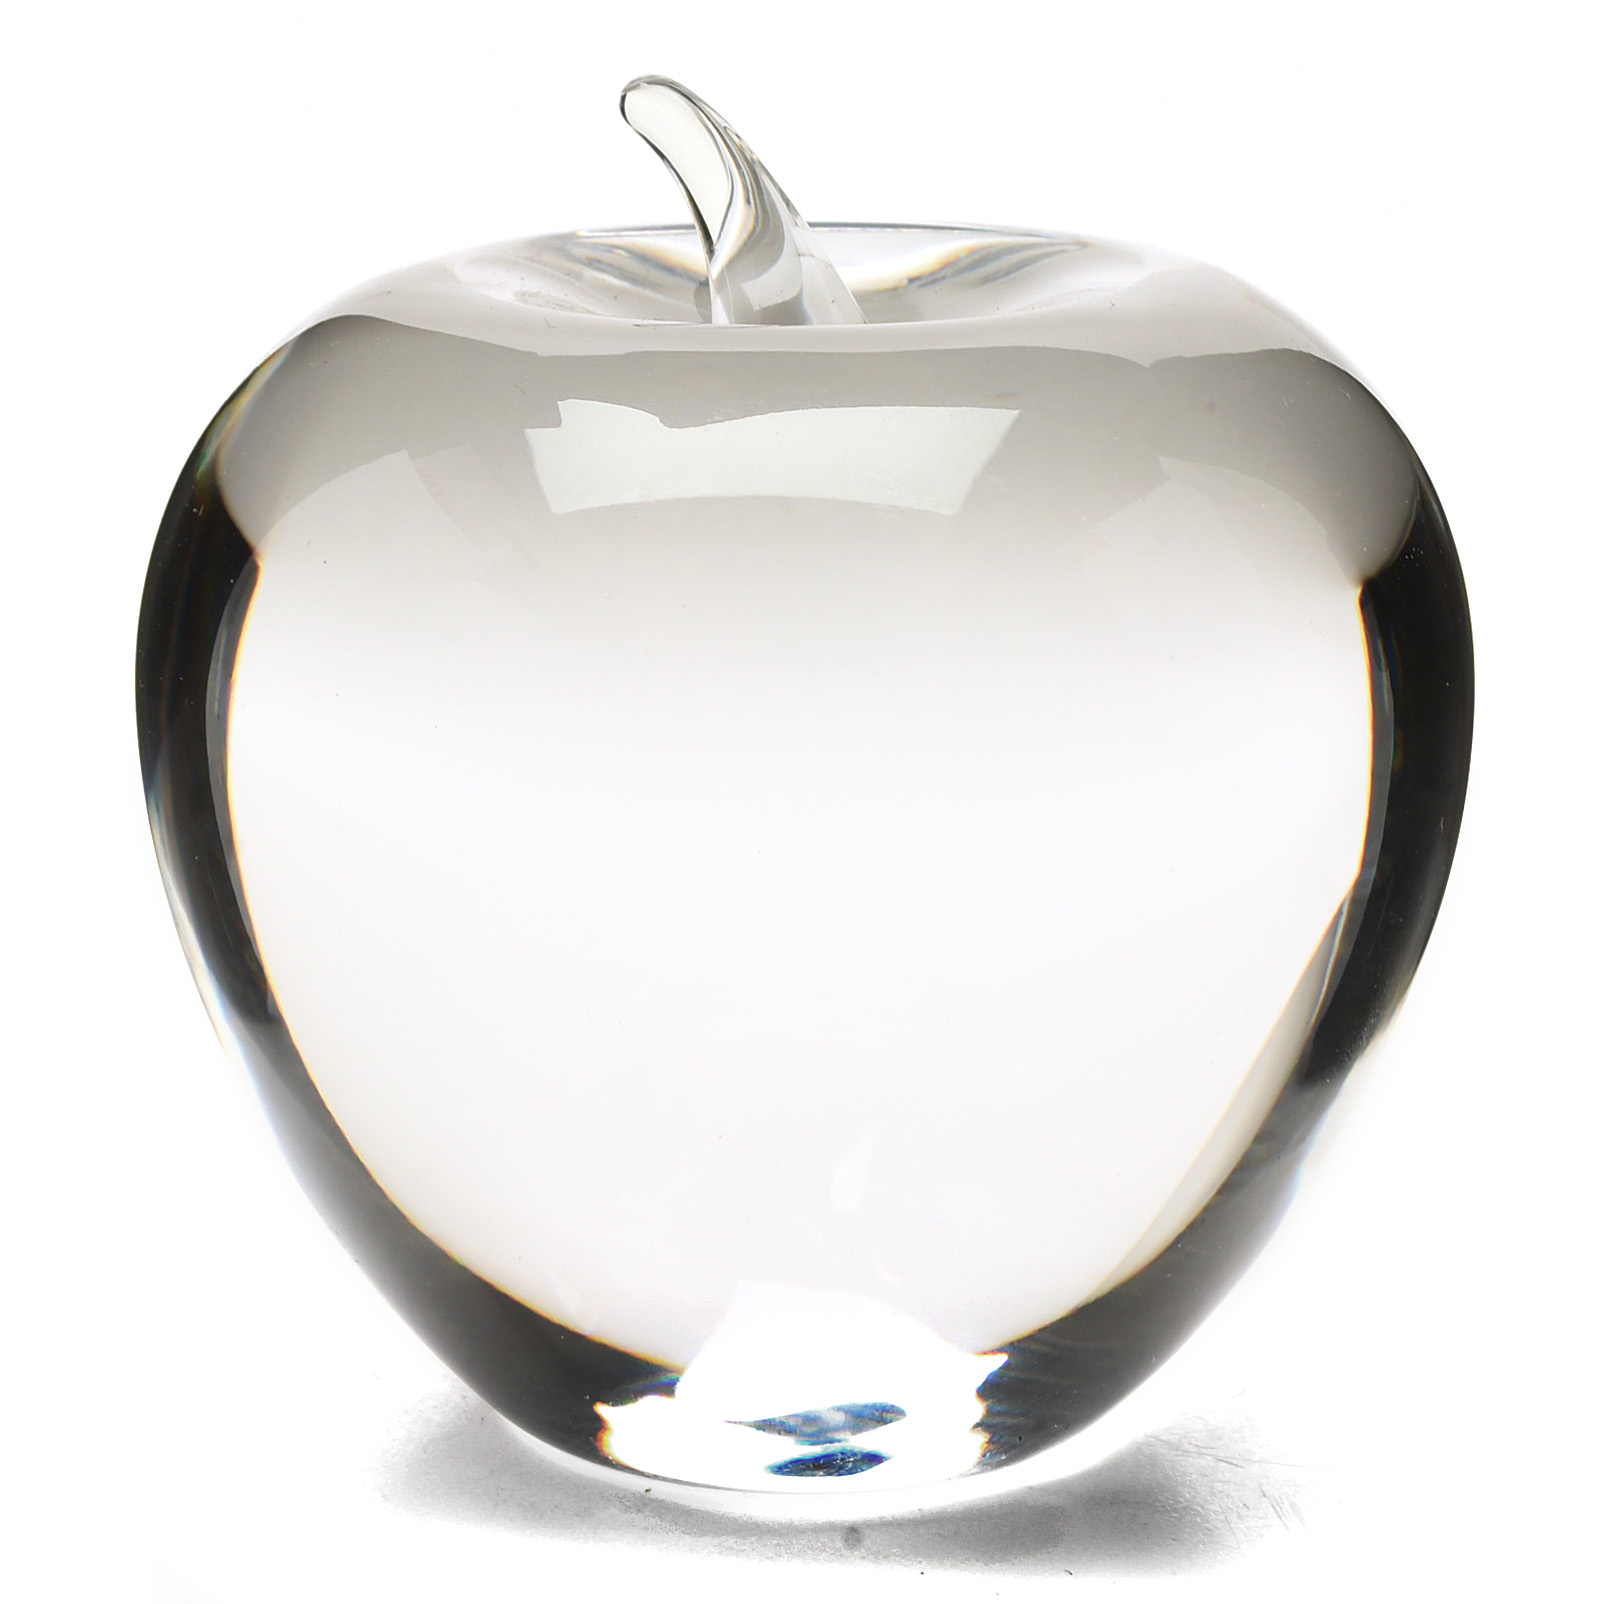 tiffany apple paperweight